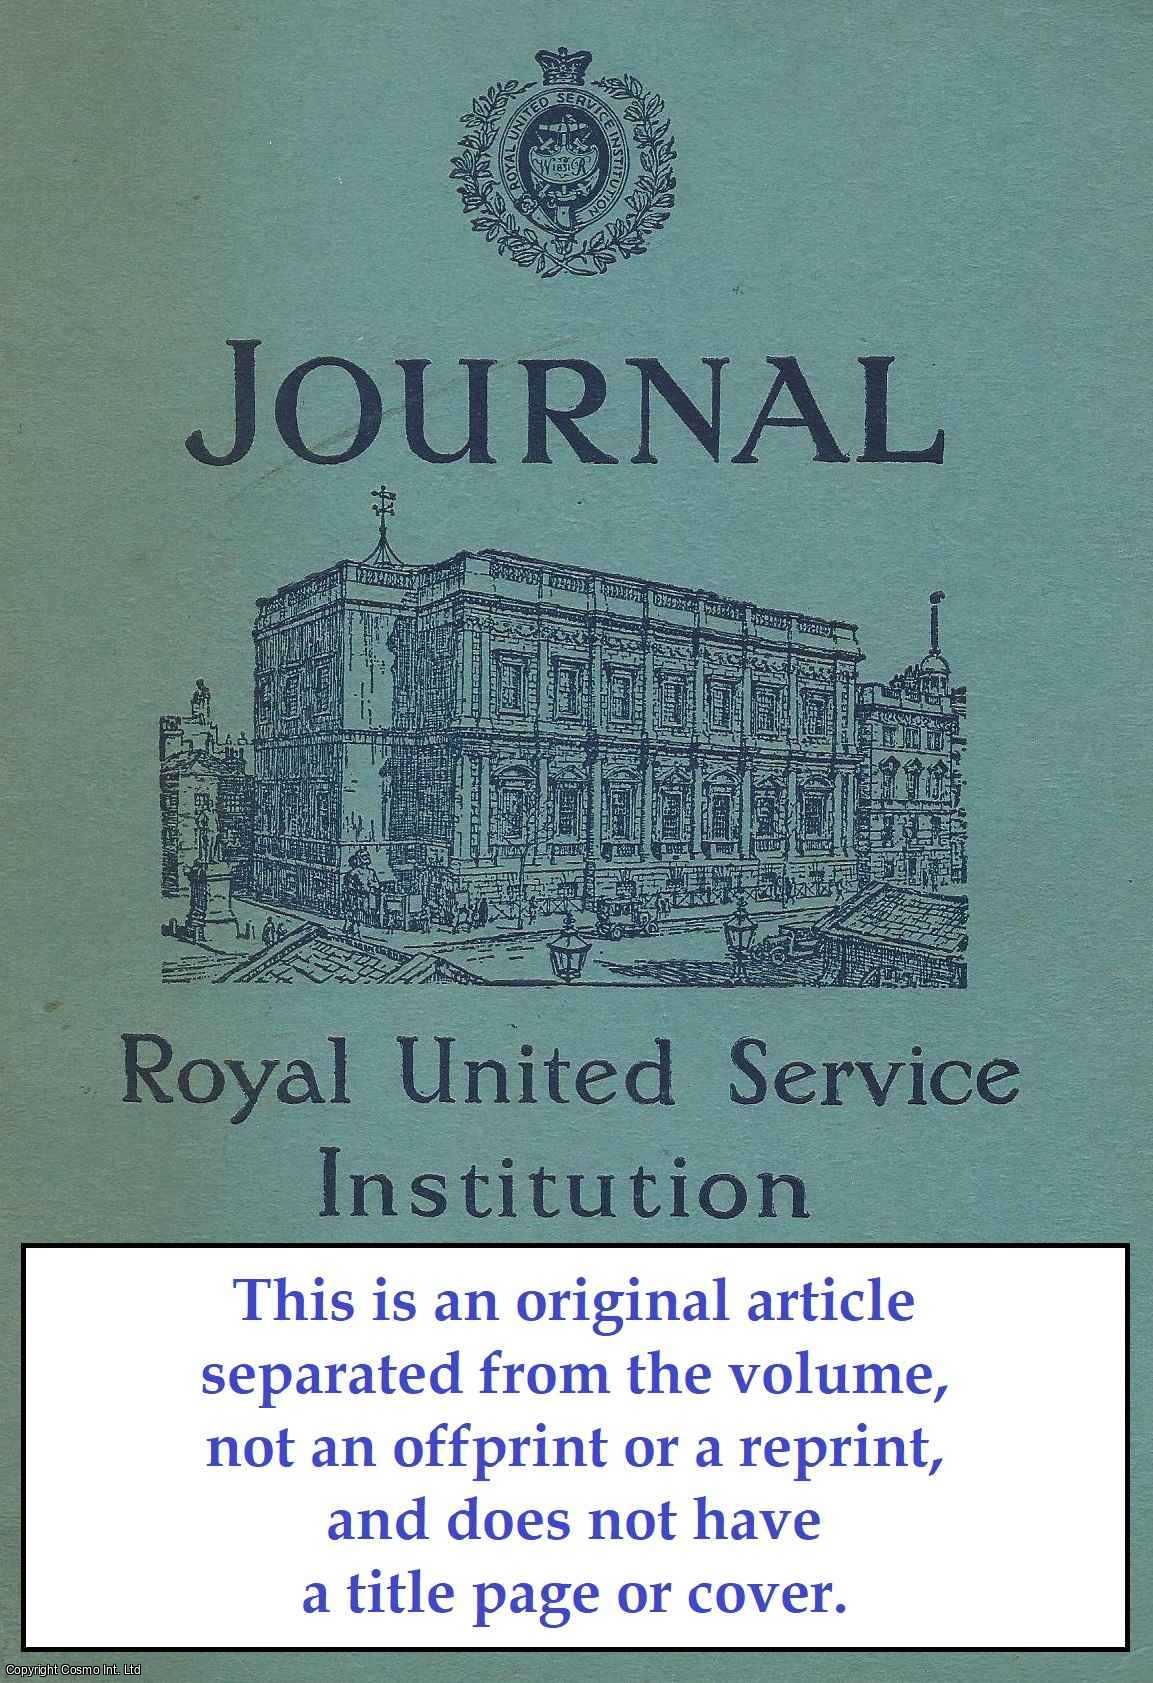 M. C. S. Phipps - Trotsky: Decine and Fall. An original article from Journal of The Royal United Service Institution, 1960.